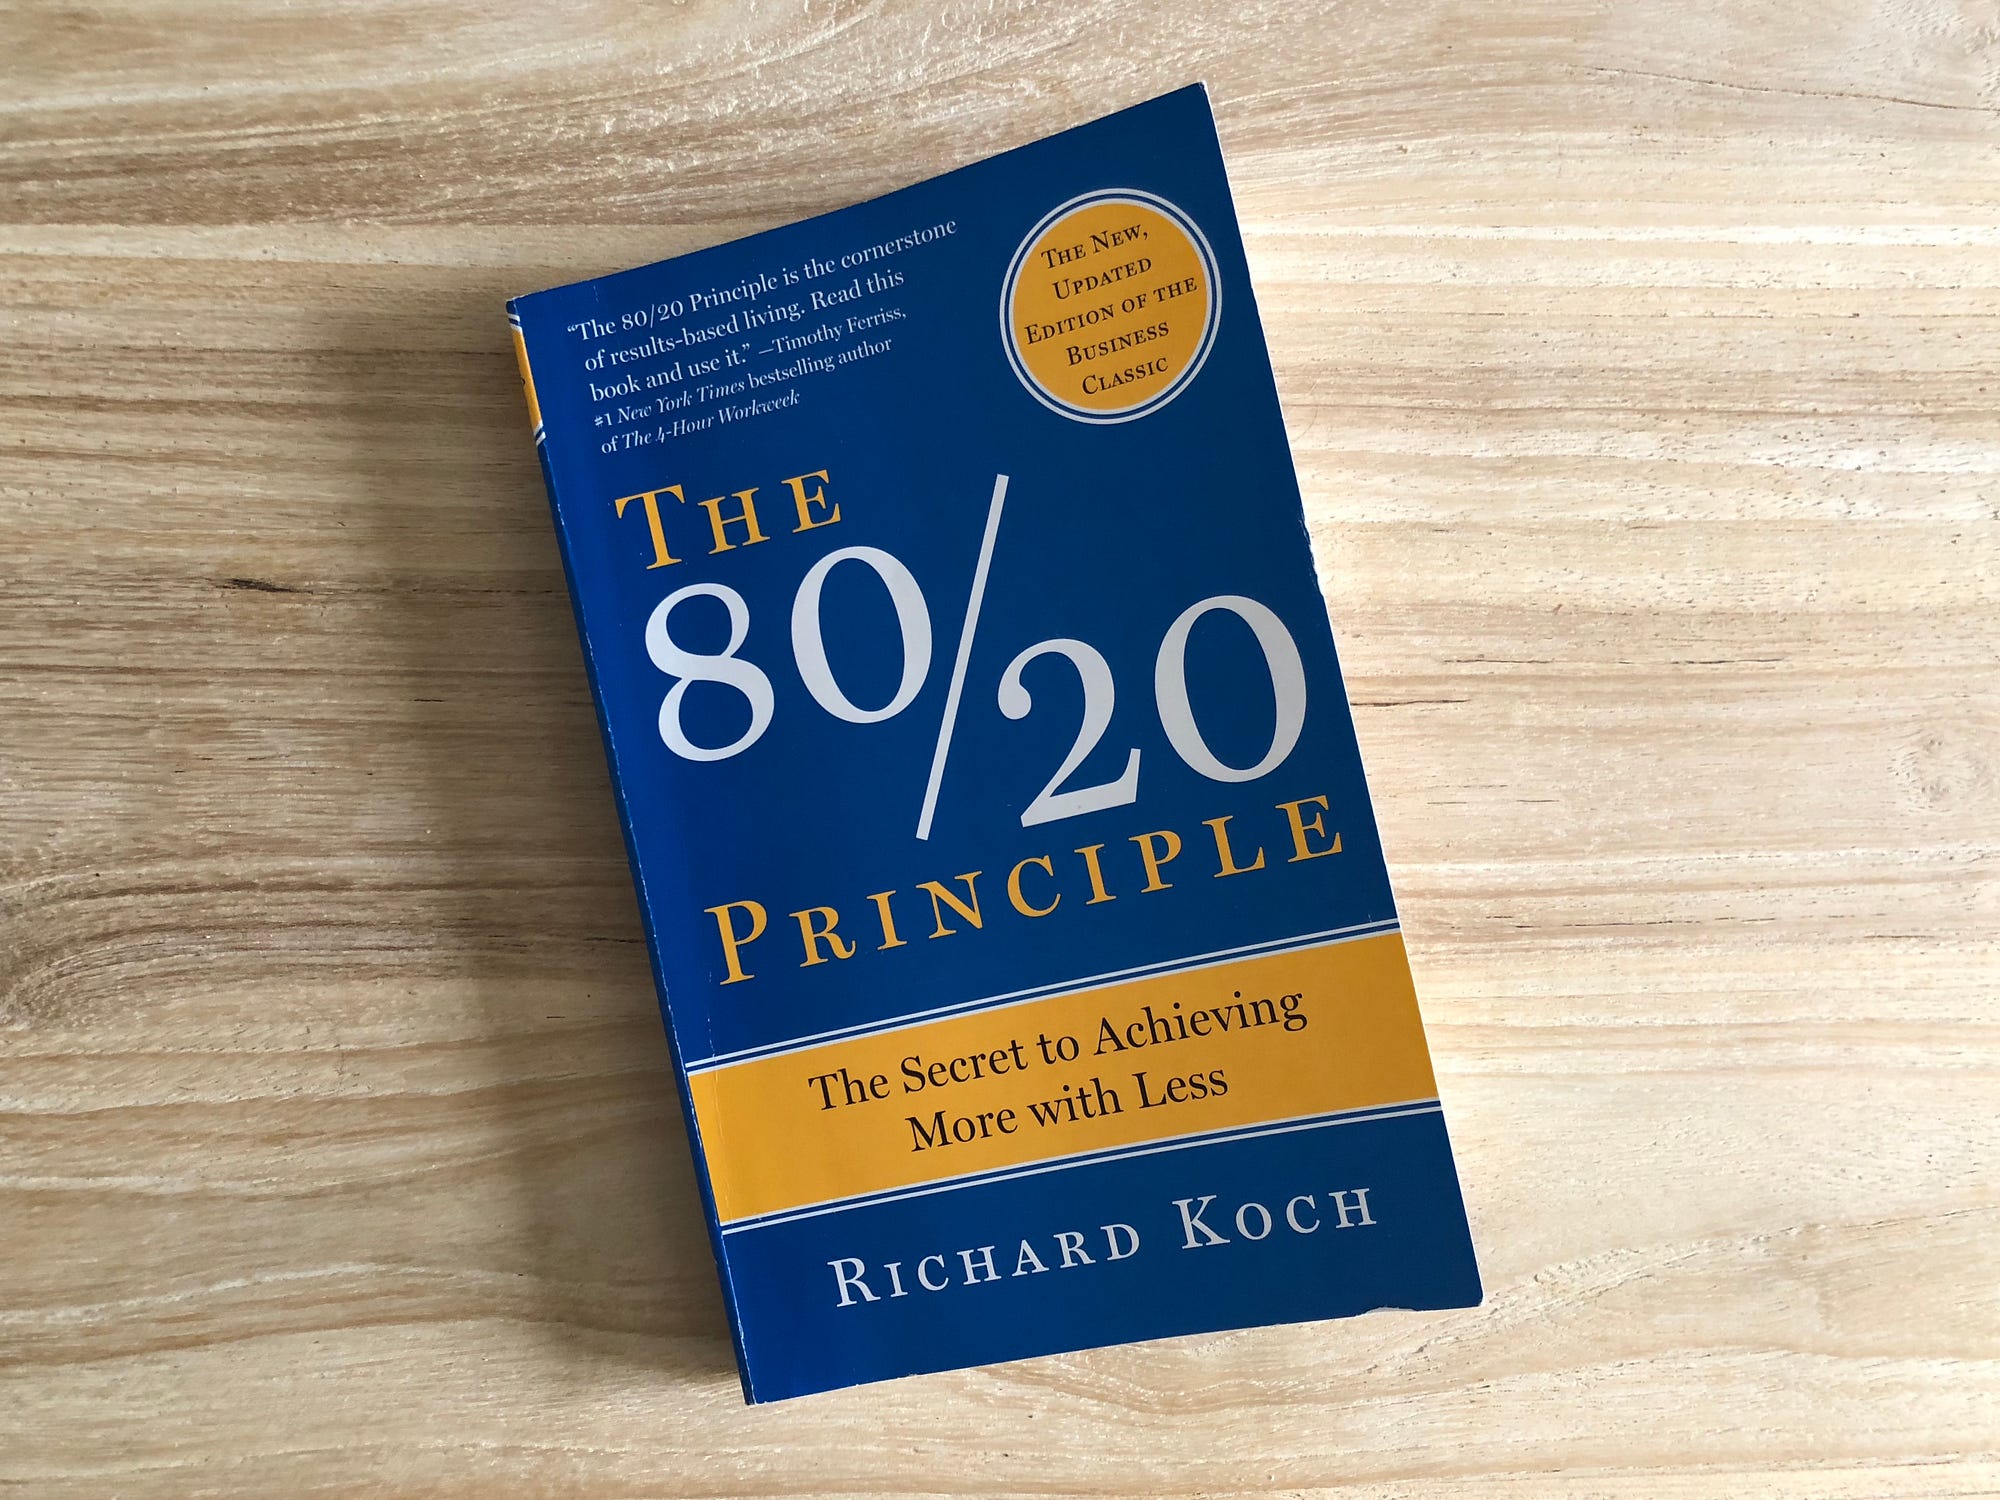 Notes on The 80/20 Principle. By Richard Koch, by Aidan Hornsby